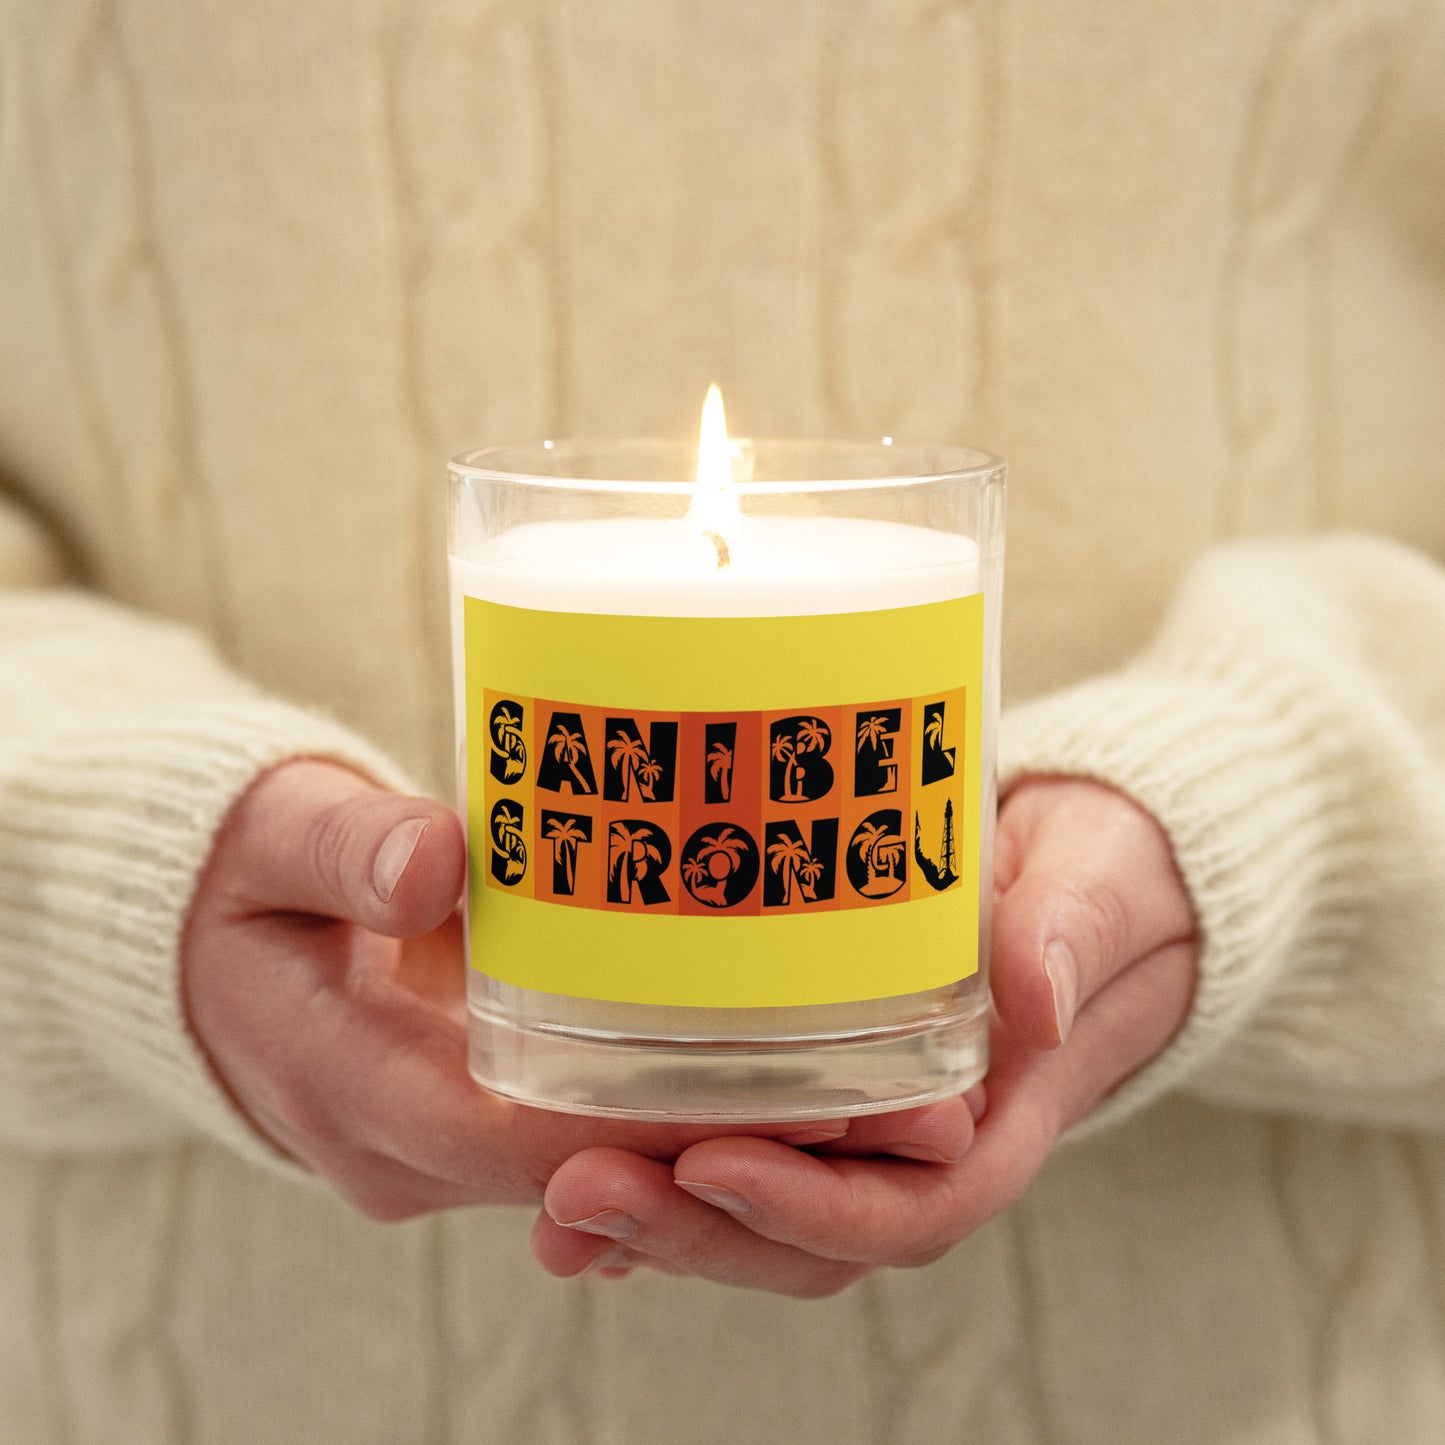 Sanibel Strong Soy Candle